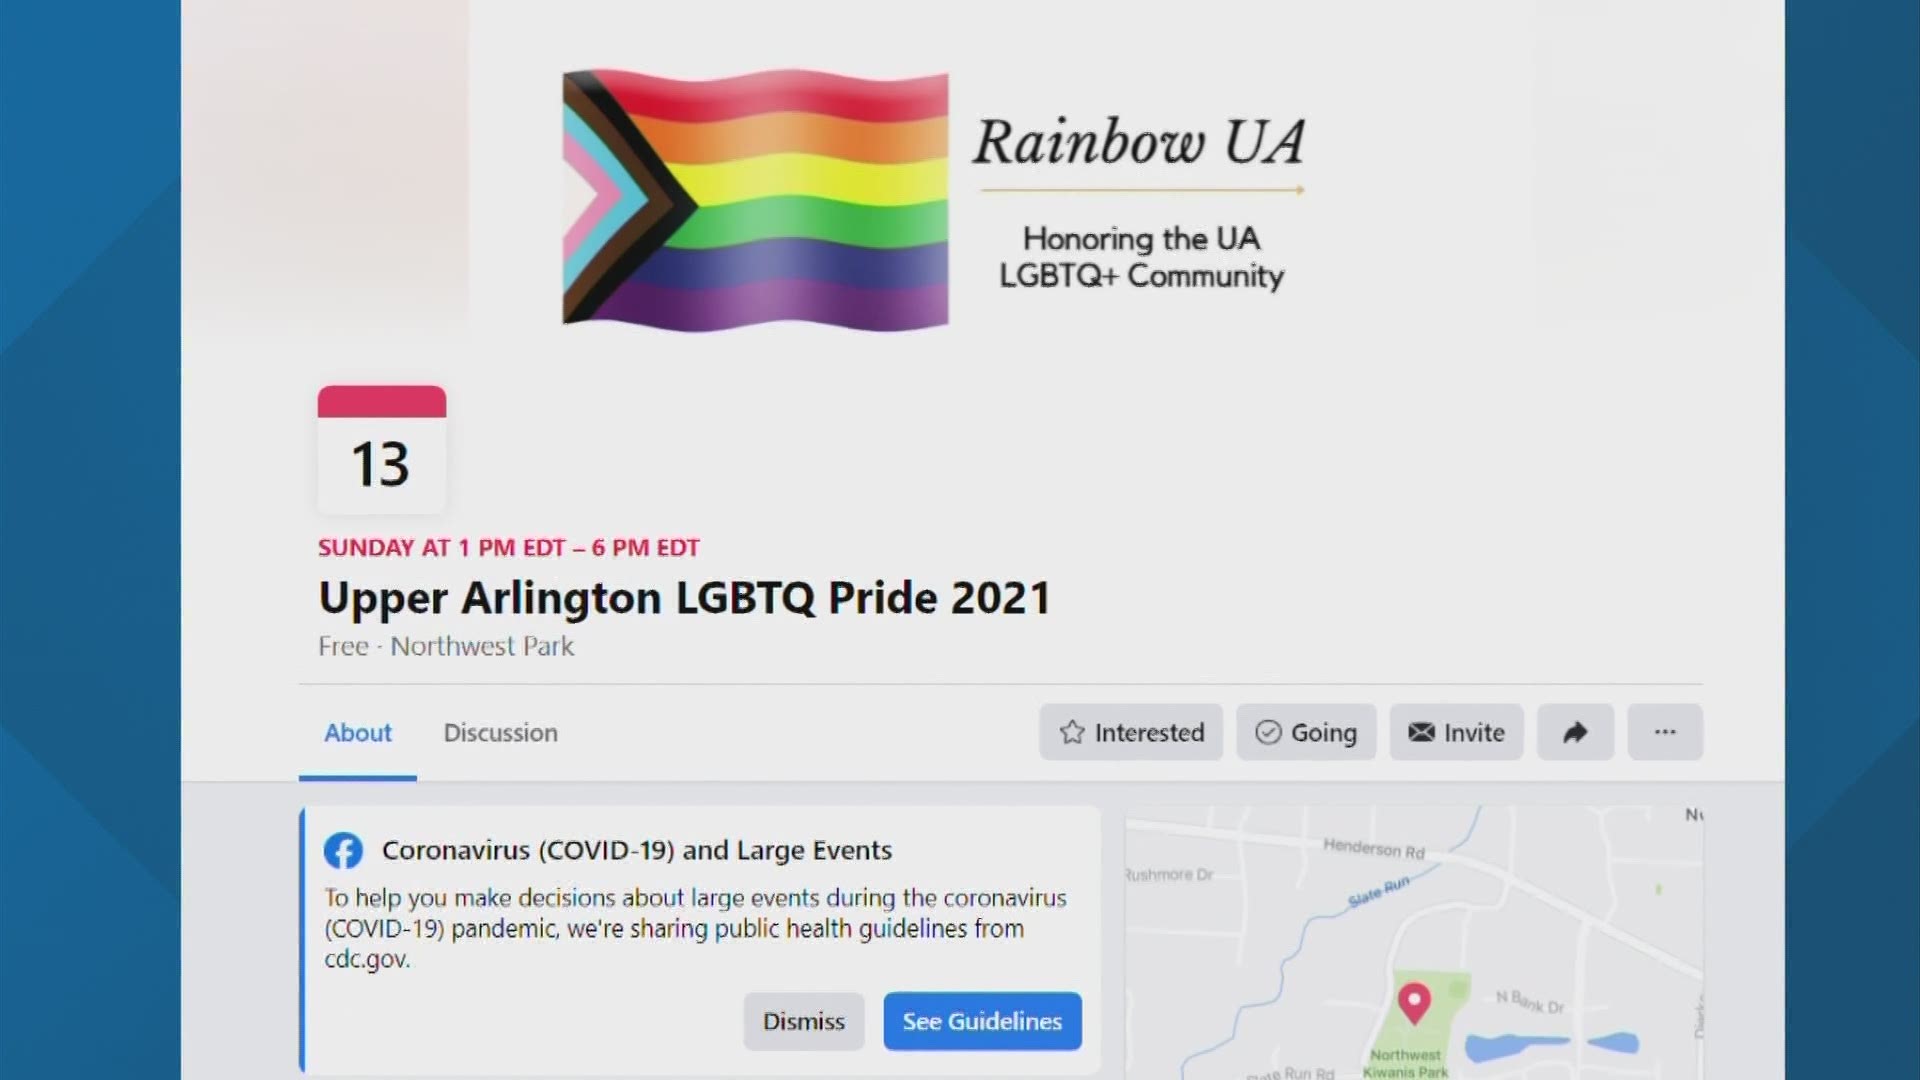 A newly crafted organization will host the first-ever Pride event in Upper Arlington this year.